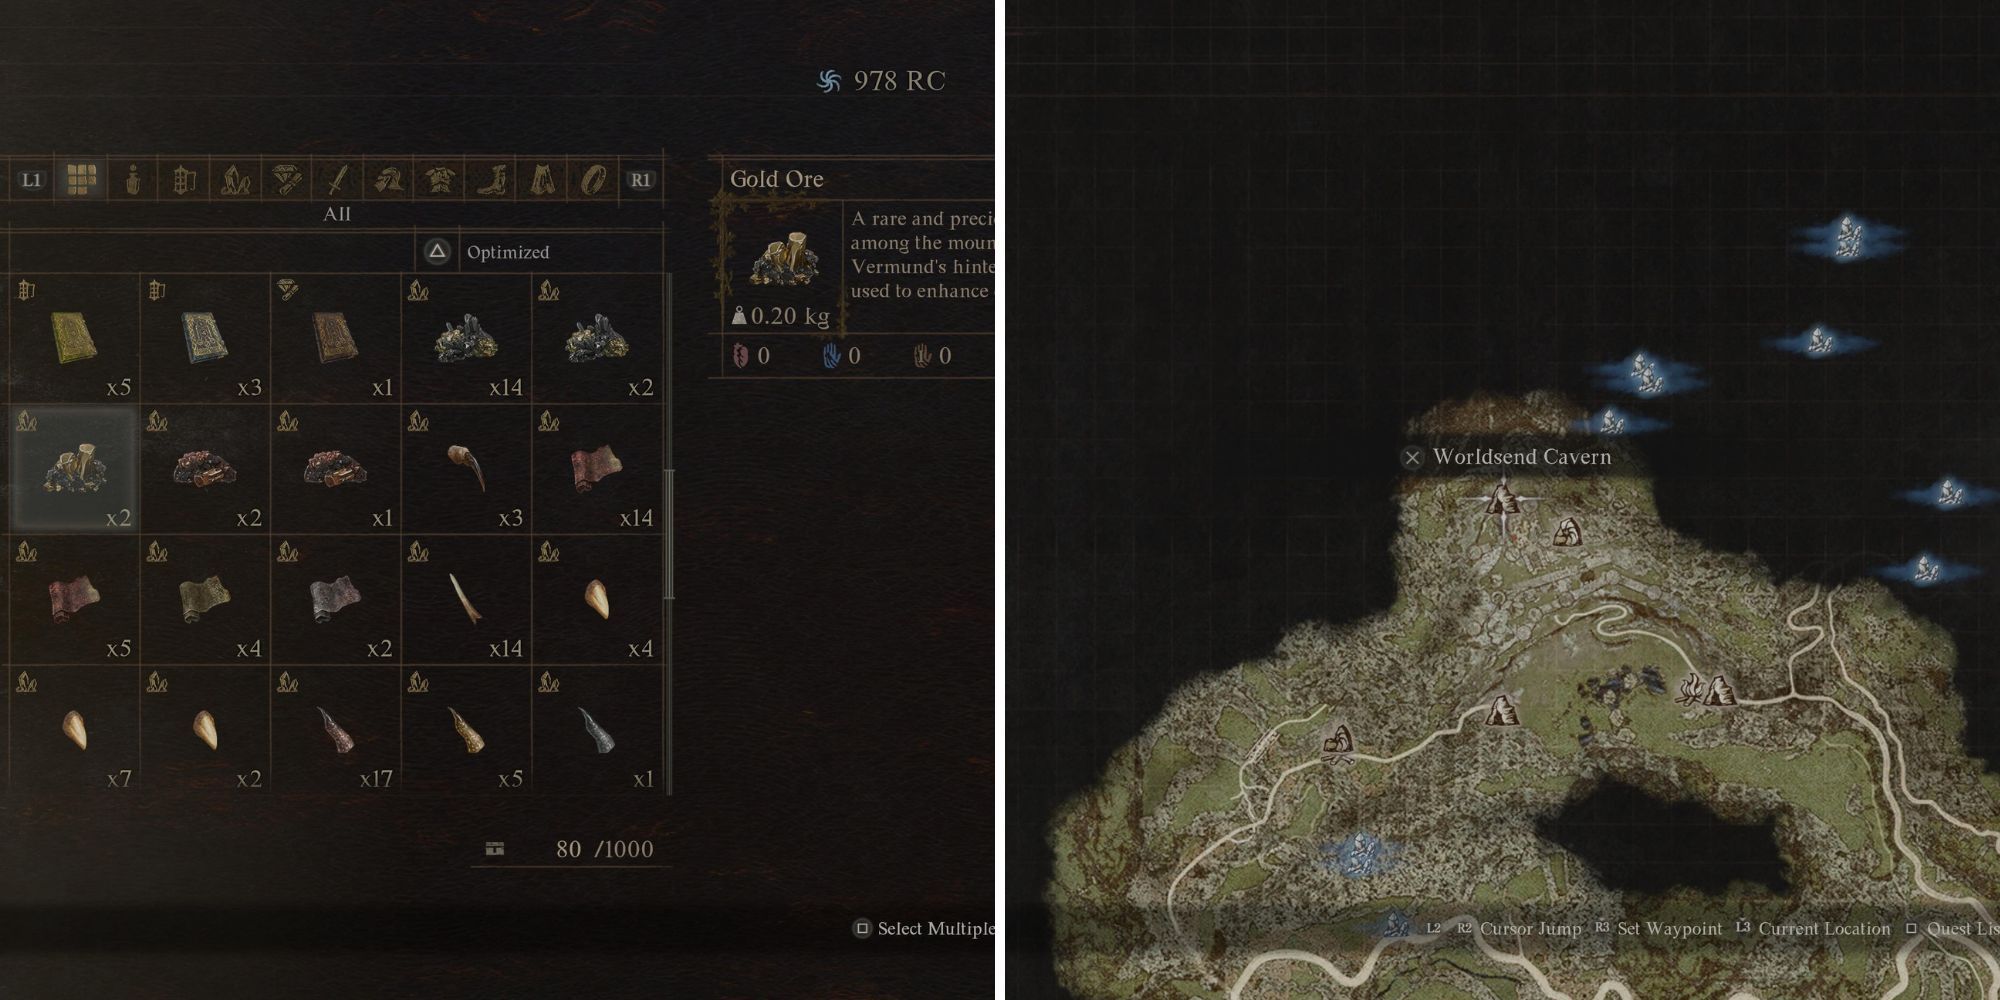 Gold Ore In The Menu & The Worldsend Cave Location On The Map 